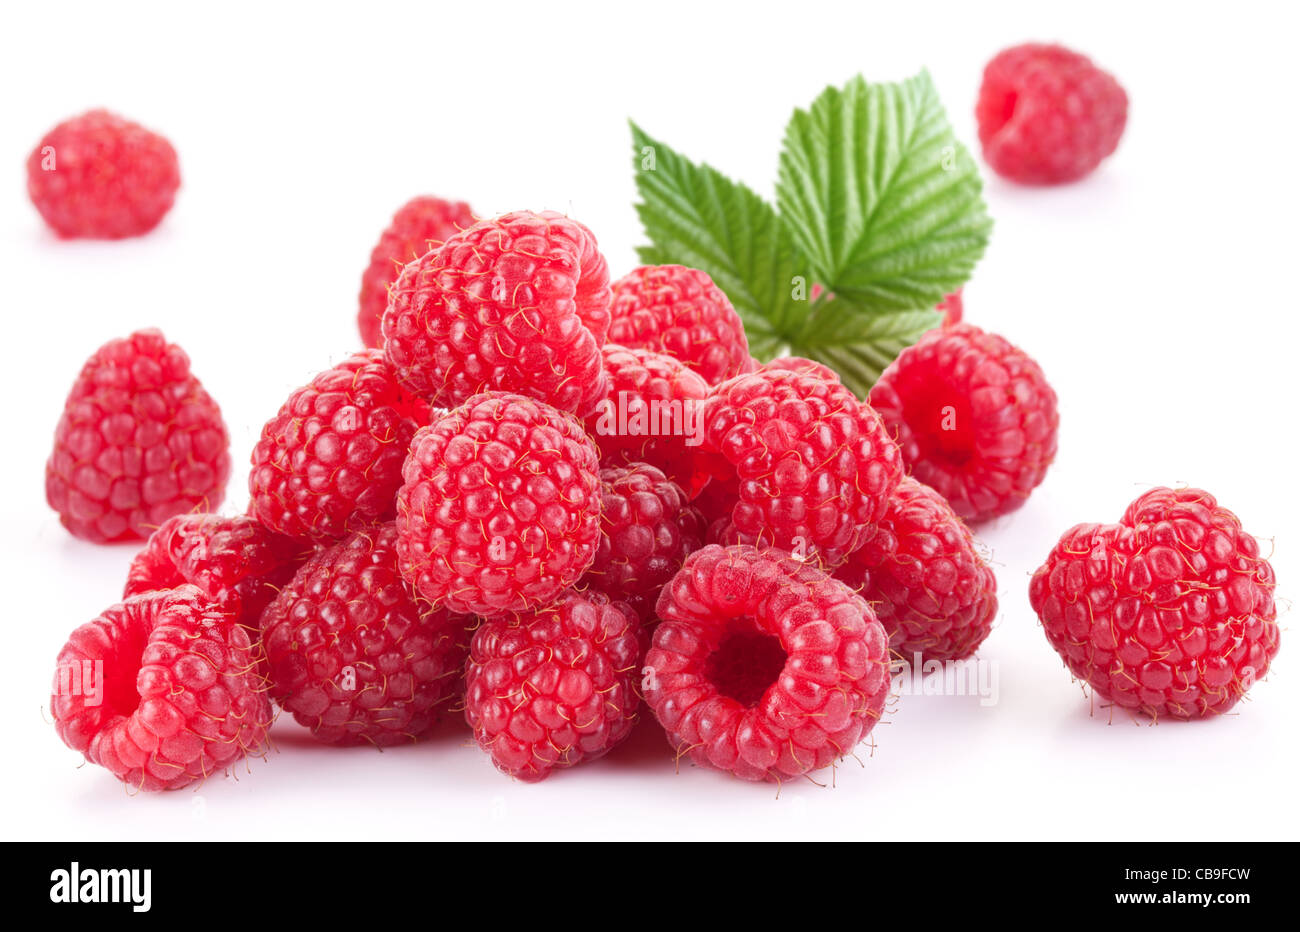 Ripe raspberries isolated on a white background. Stock Photo